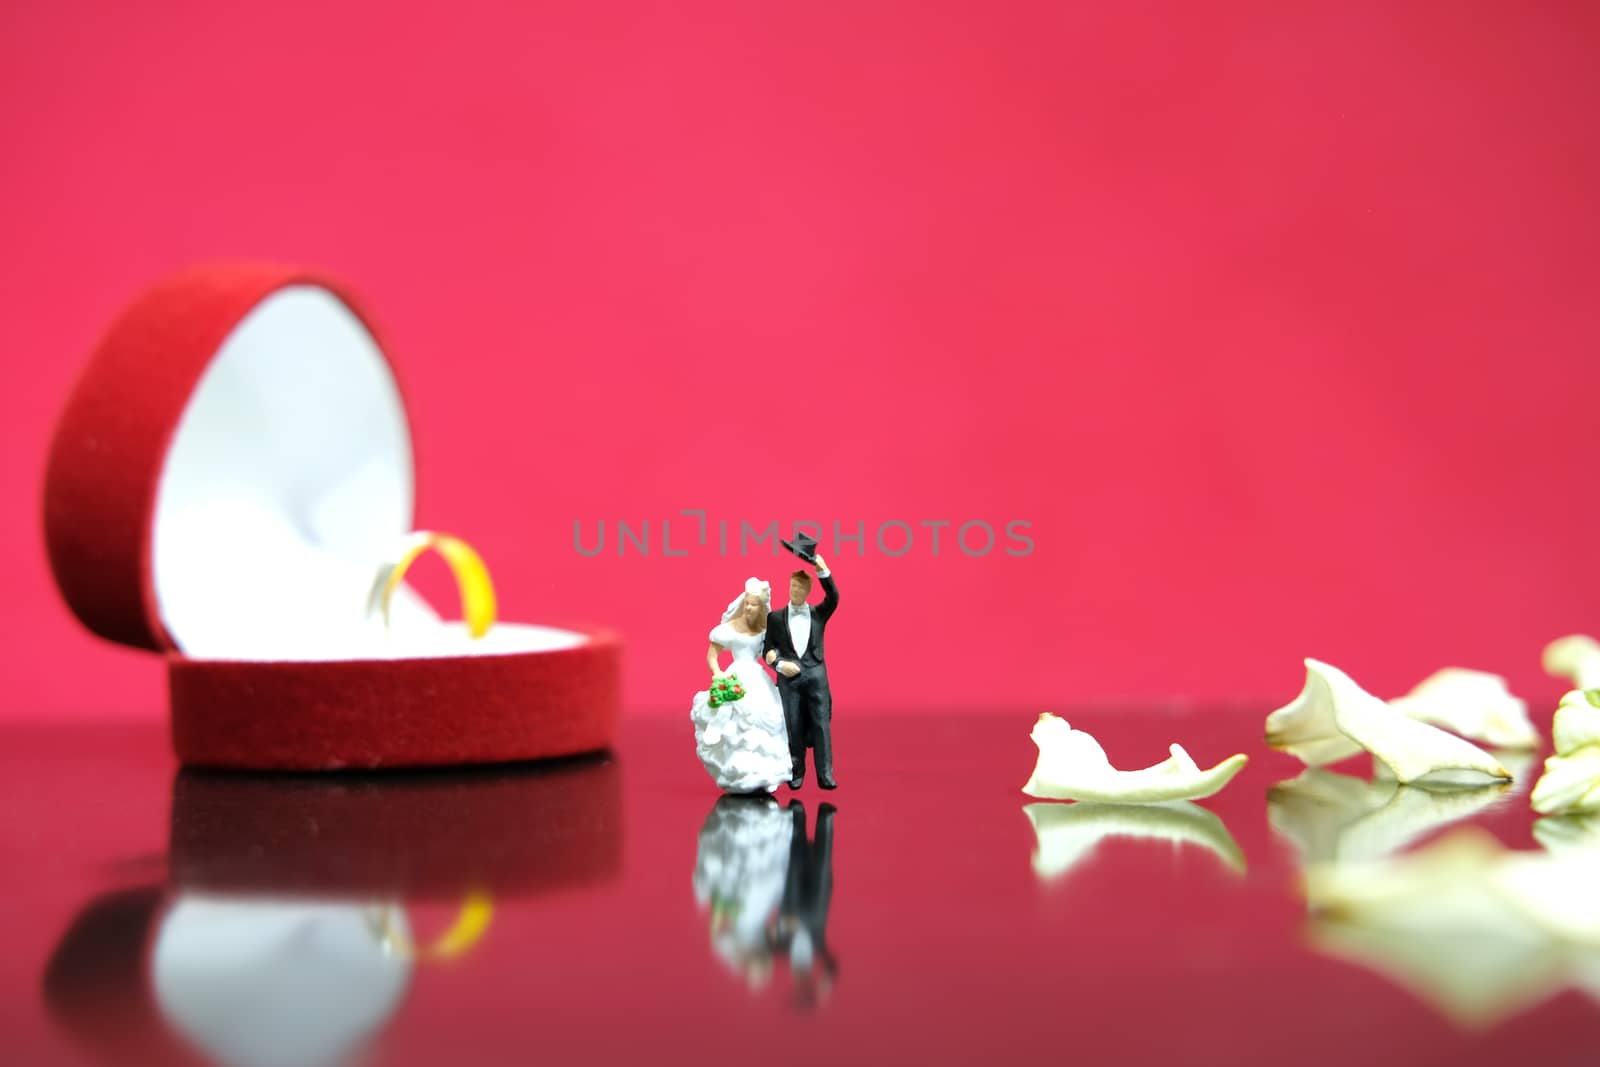 Miniature photography - garden flower outdoor wedding concept, bride and groom walking on shiny floor with white rose petal, including red heart shape ring box by Macrostud